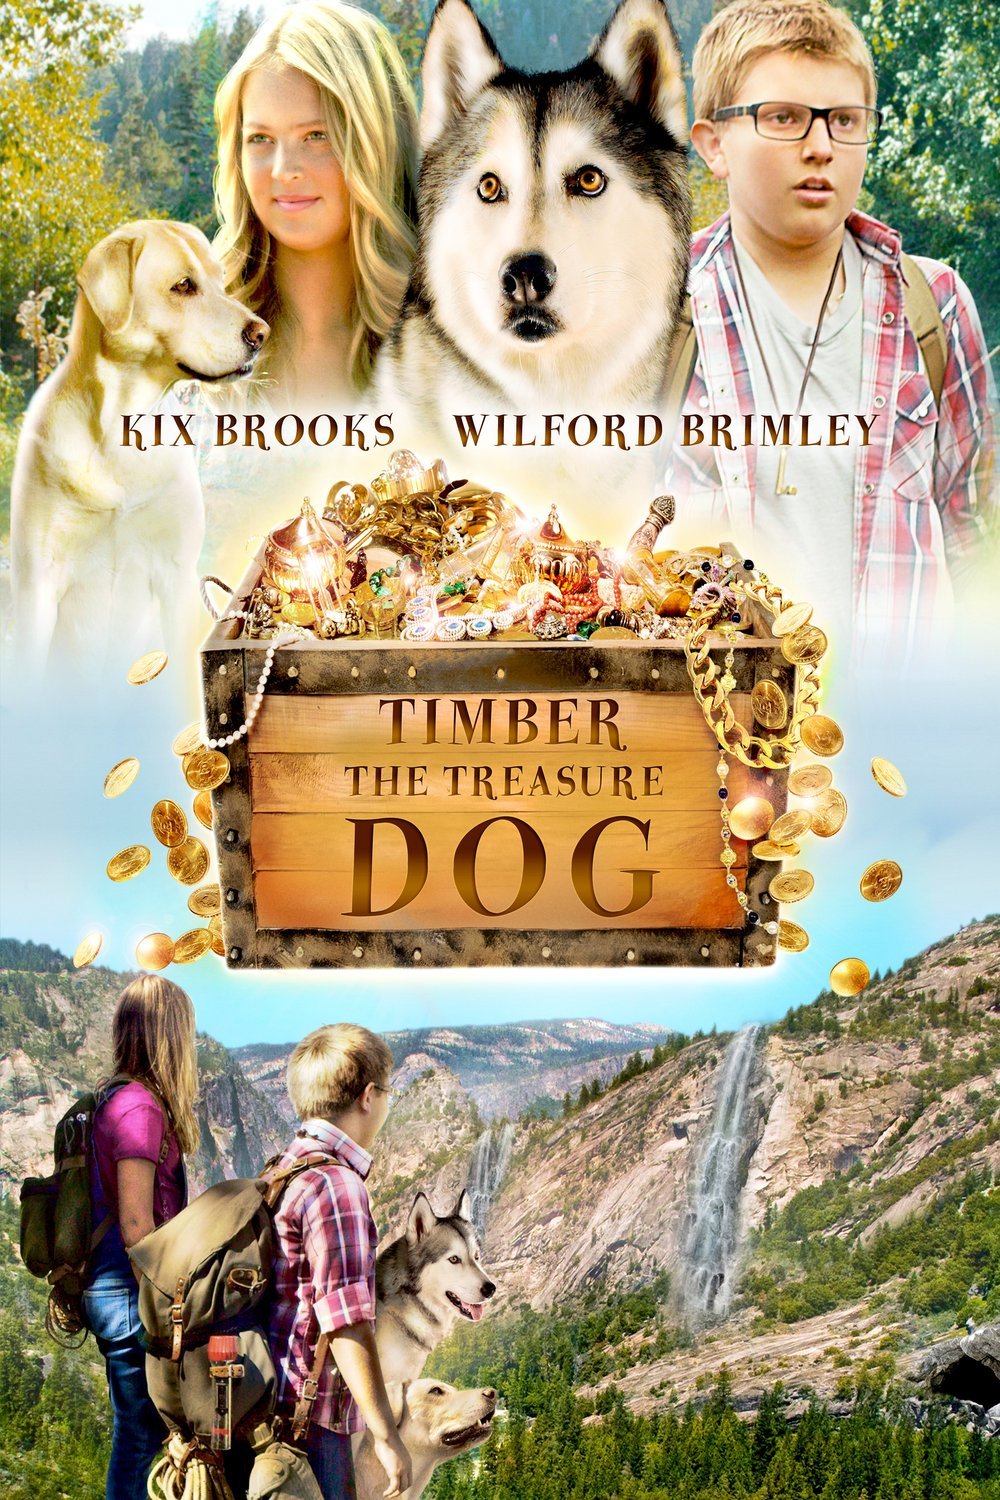 Poster of the movie Timber the Treasure Dog